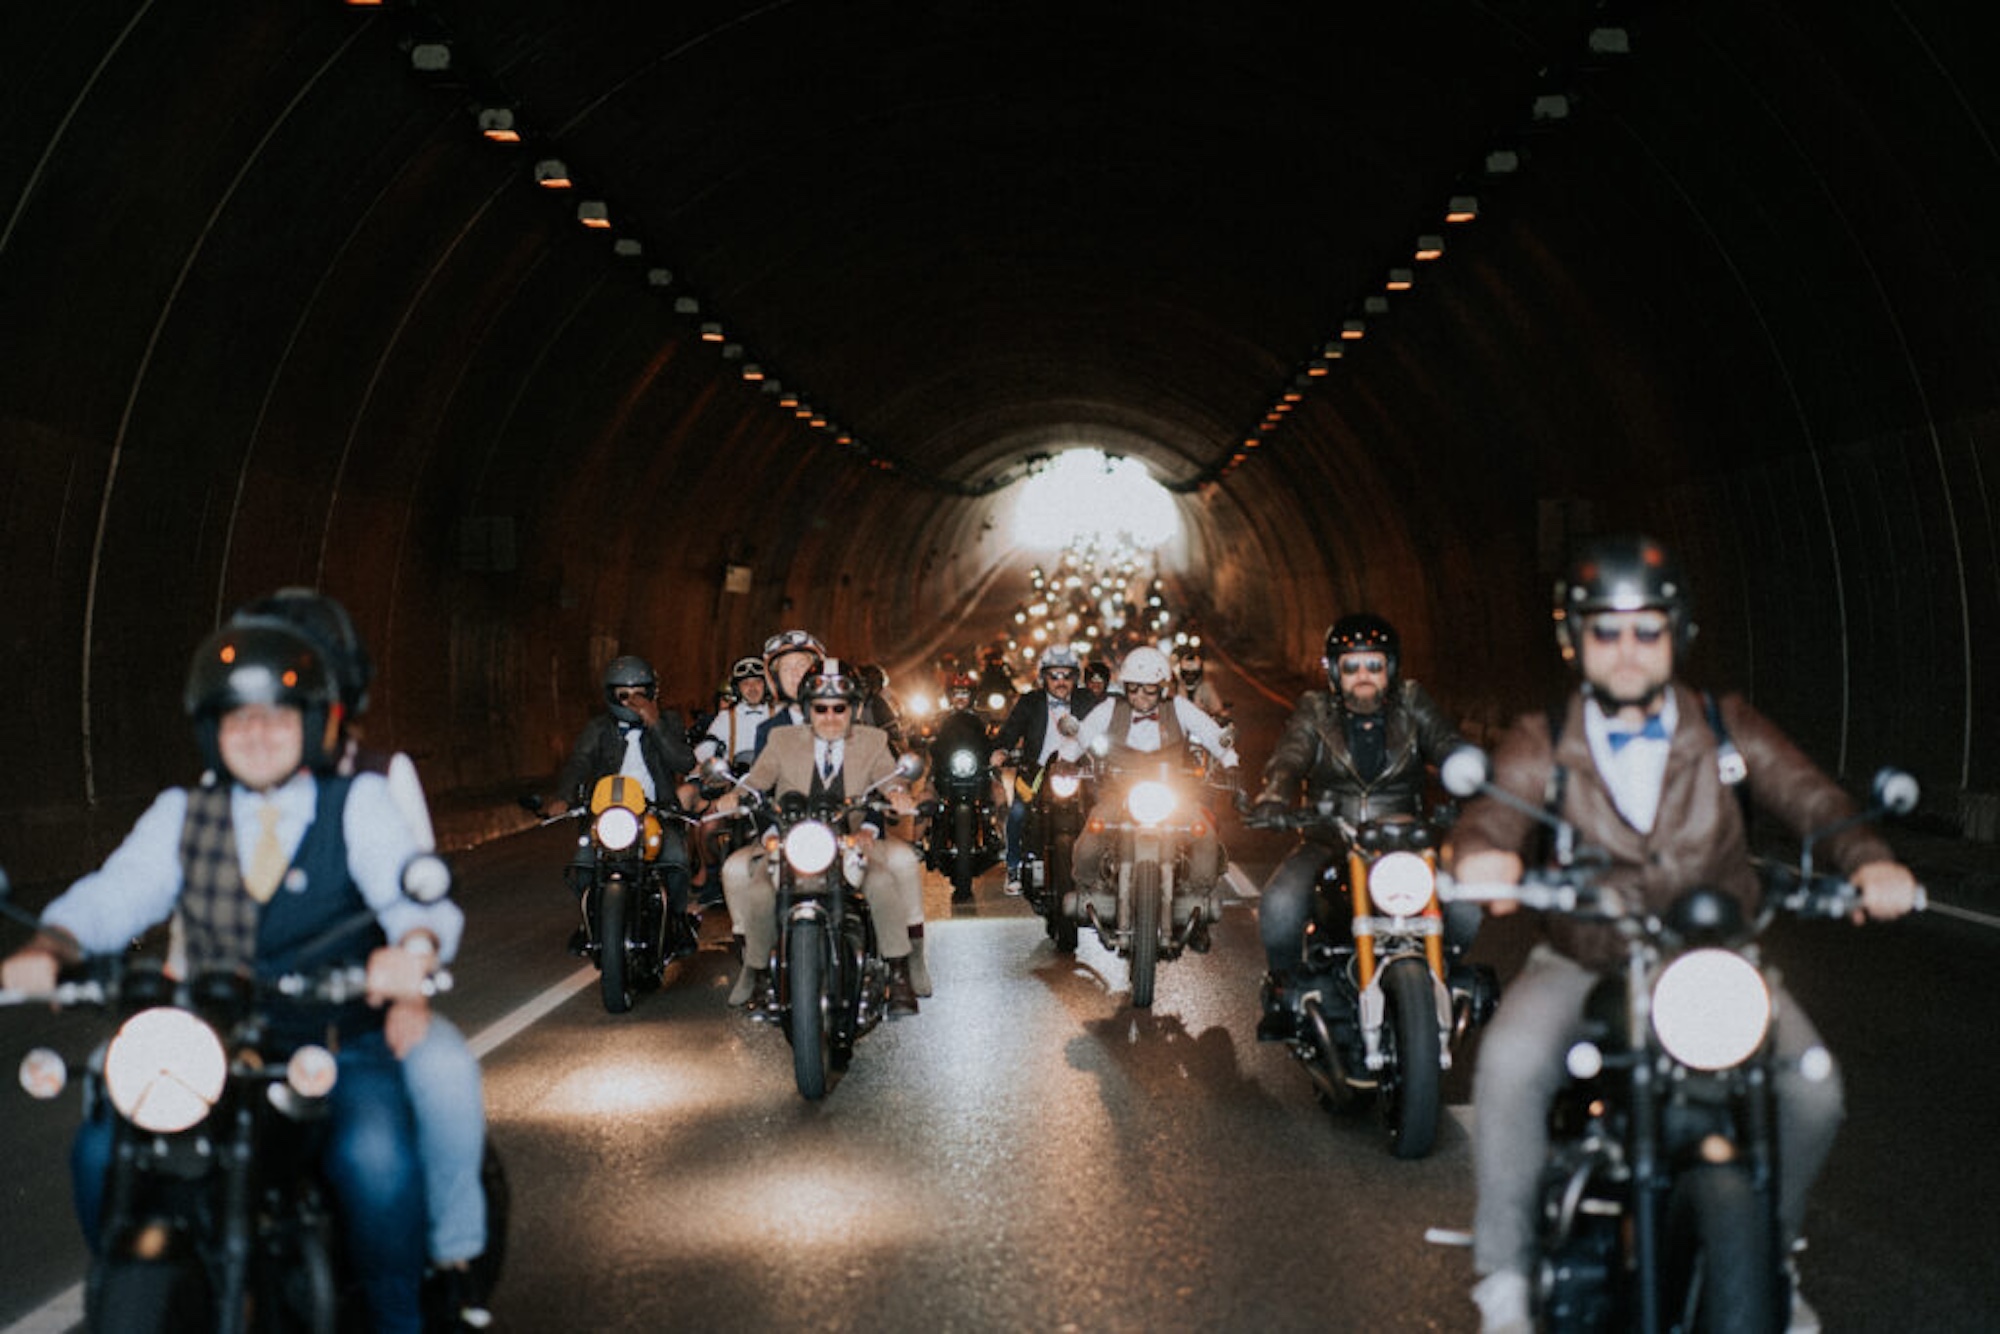 A group of motorcycle riders.